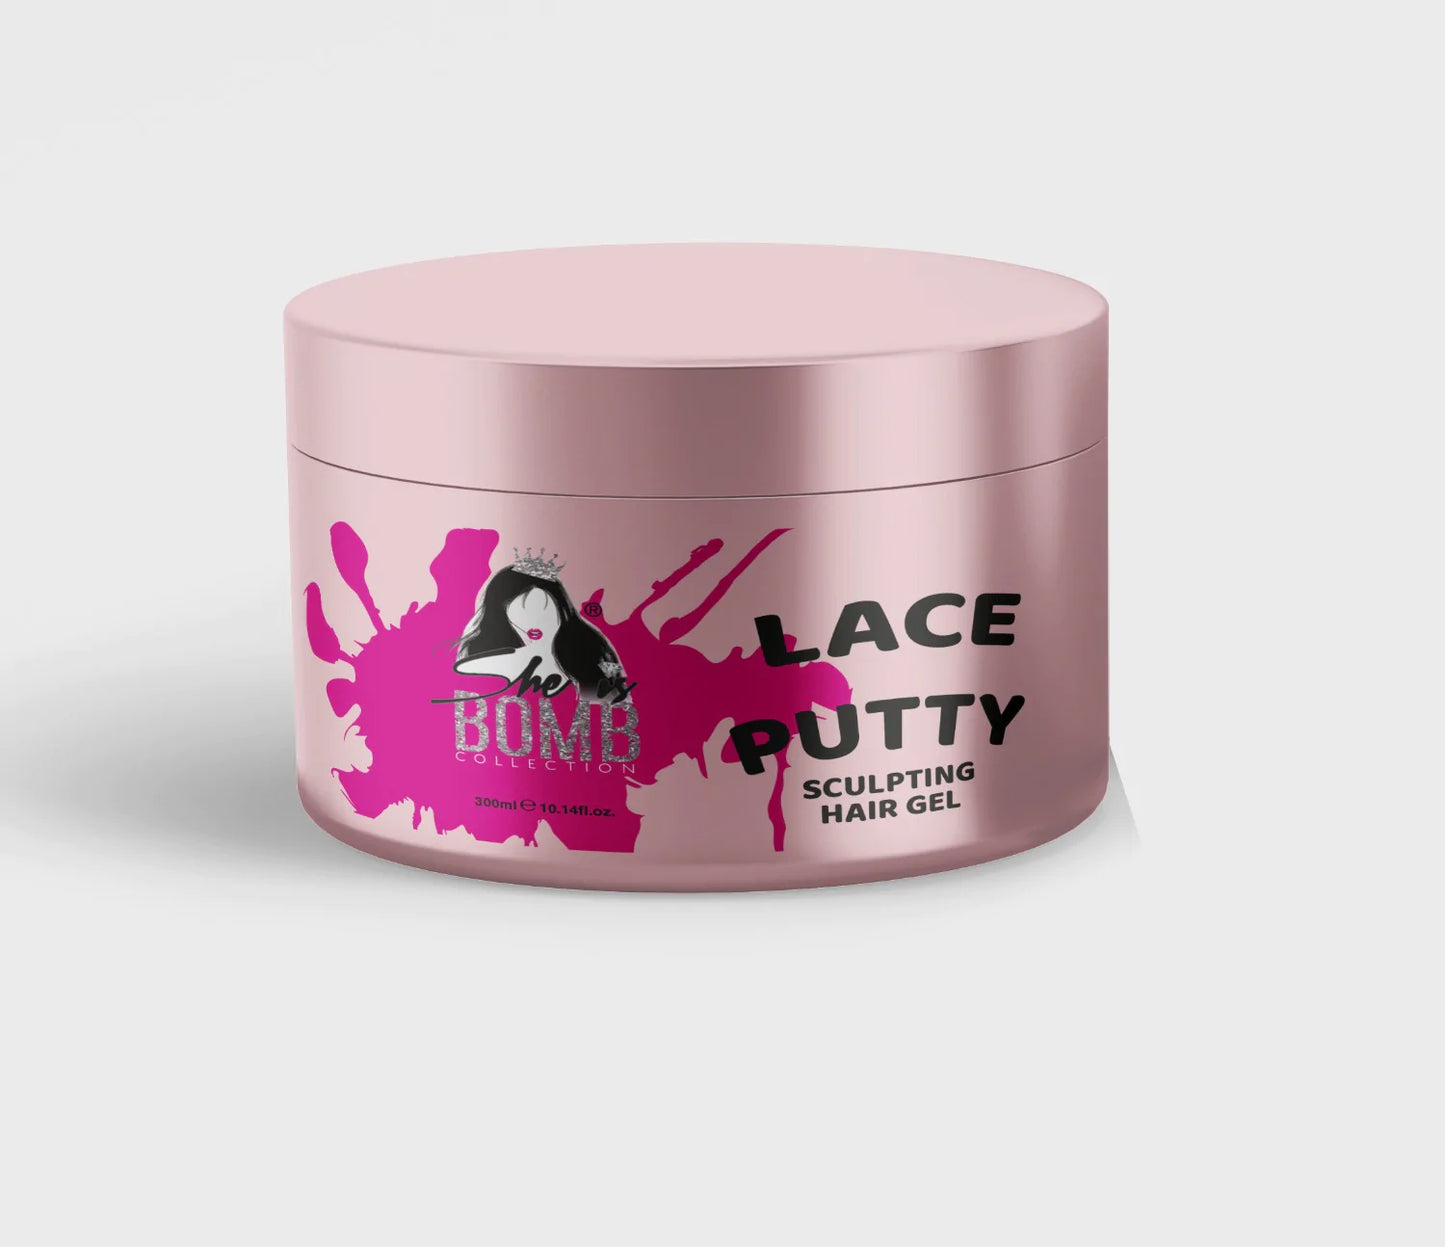 She Is Bomb Collection Lace Putty